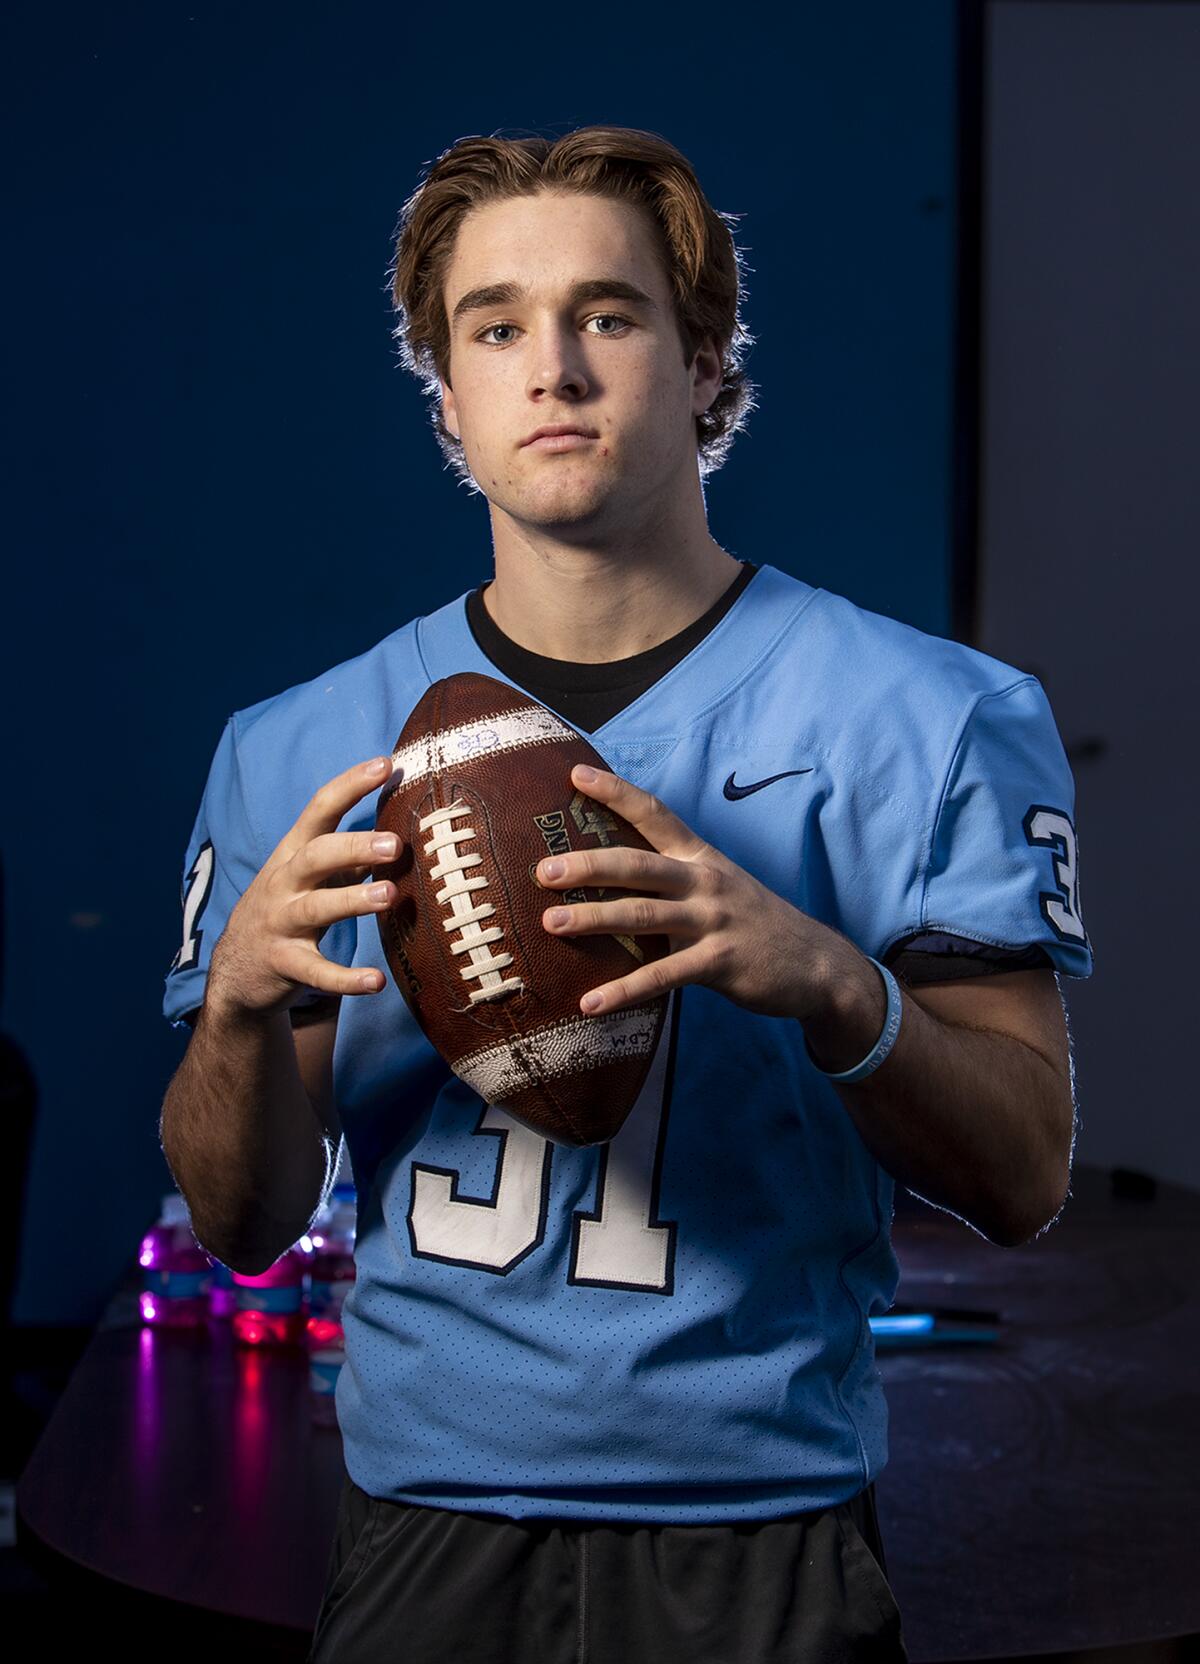 Corona del Mar senior running back Riley Binnquist has rushed 110 times for 838 yards and seven touchdowns this season.